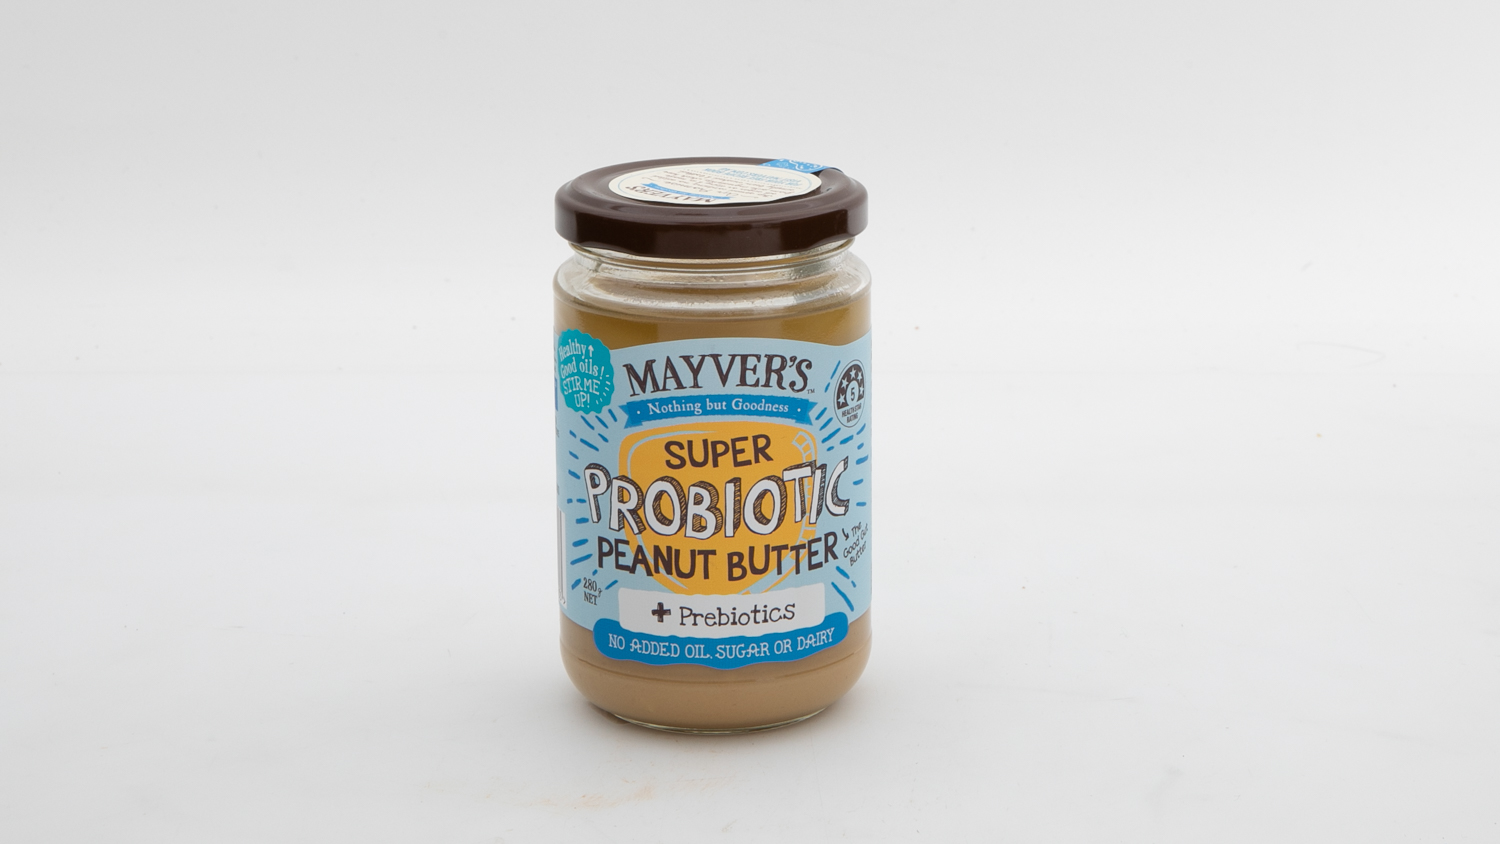 Mayver's Peanut Butter with Probiotics and Prebiotics carousel image